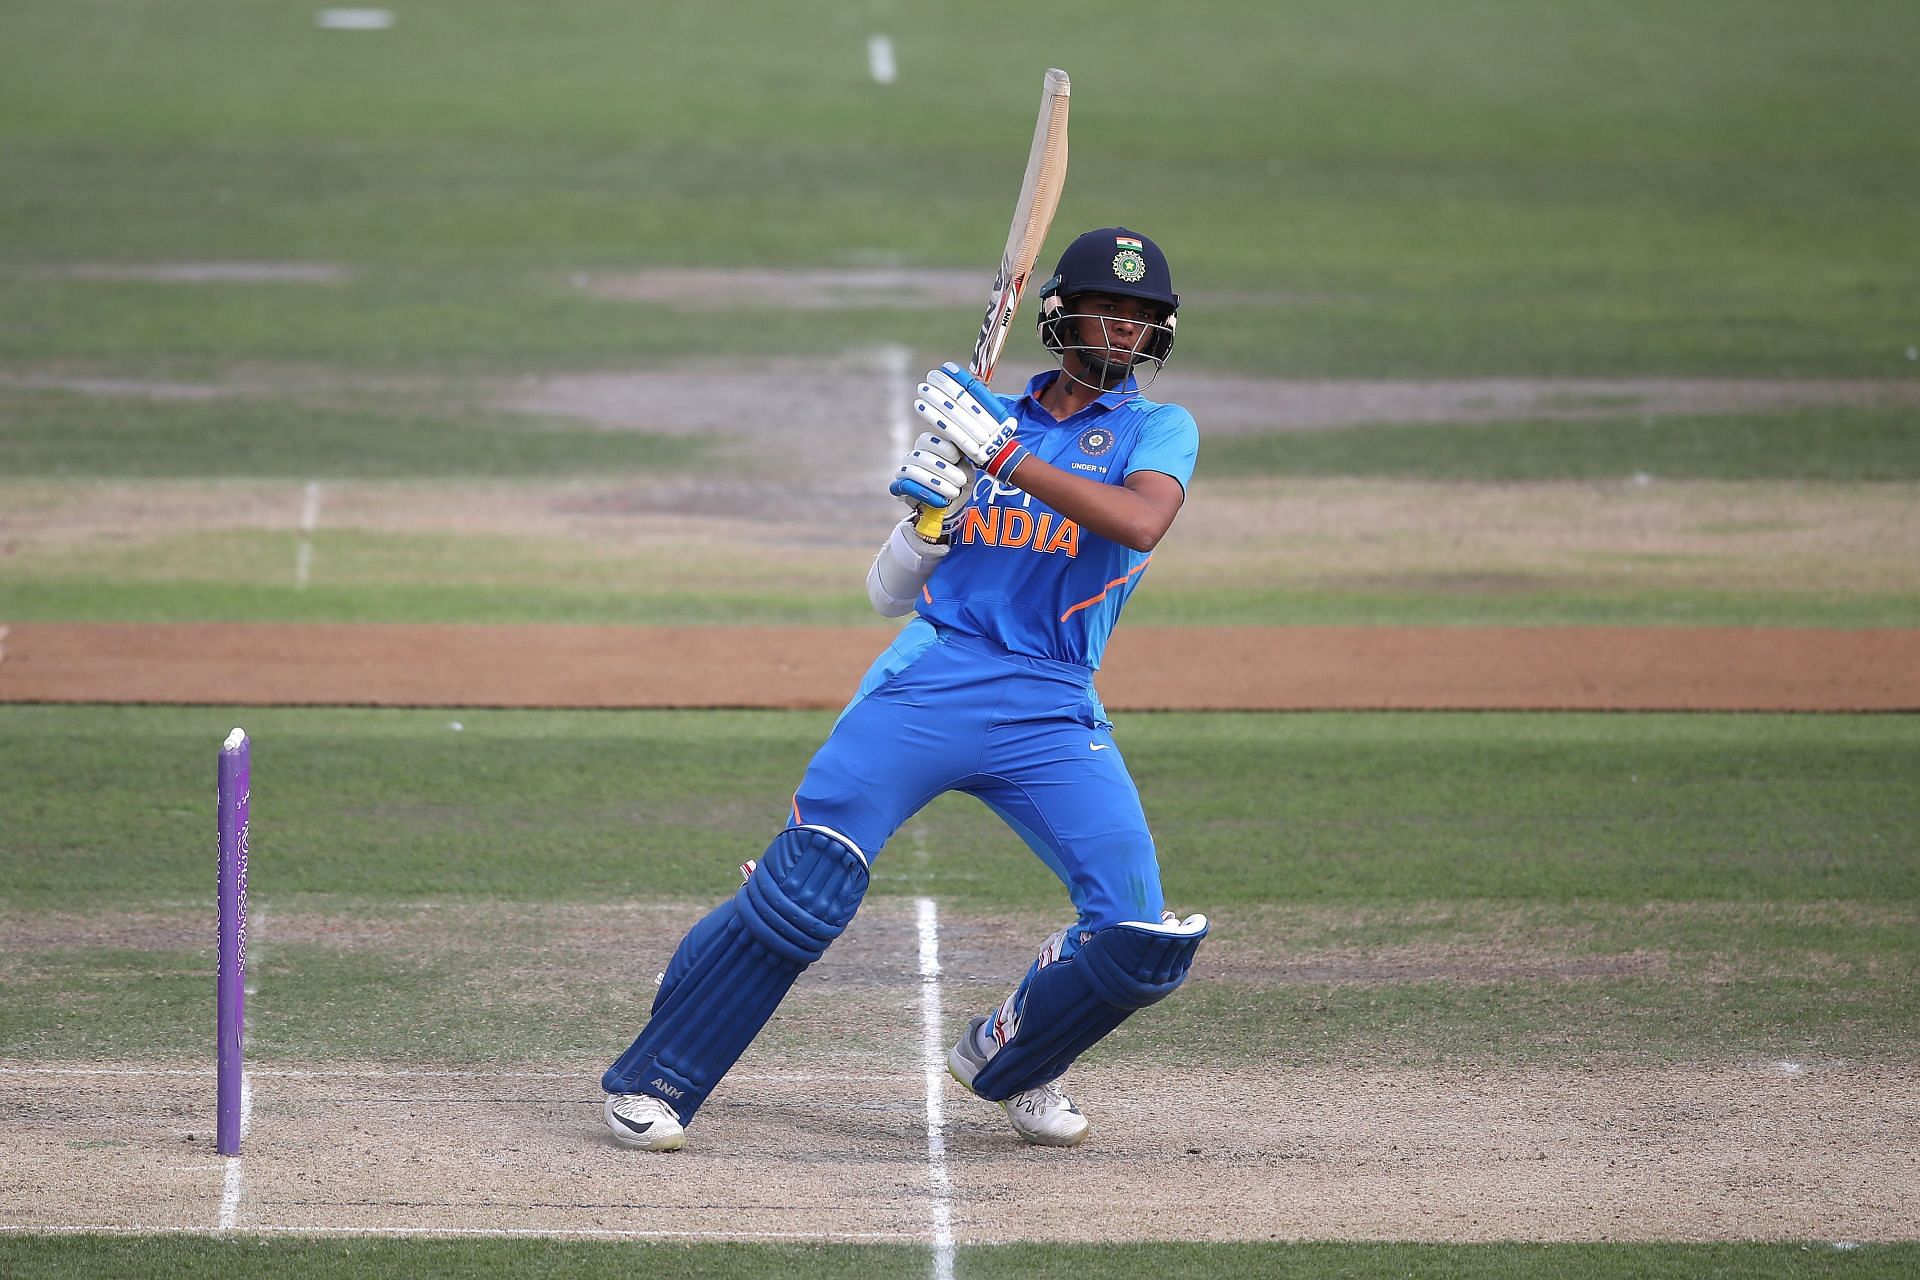            Yashasvi Jaiswal was the standout batter in the 2020 edition. (Pic: Getty Images)